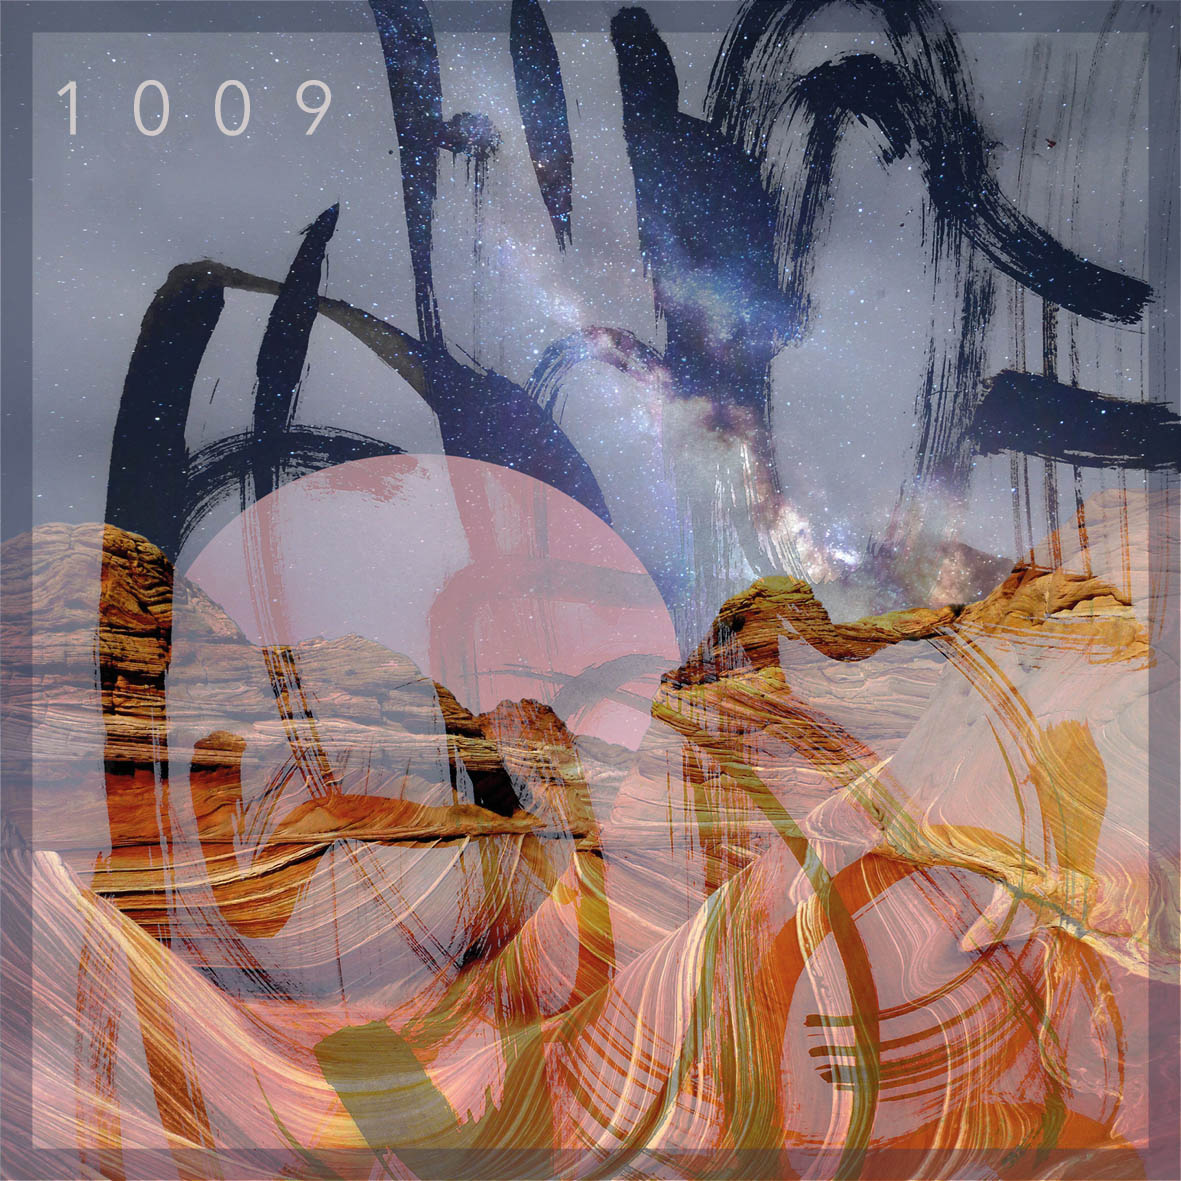 Desert image with the number 1009